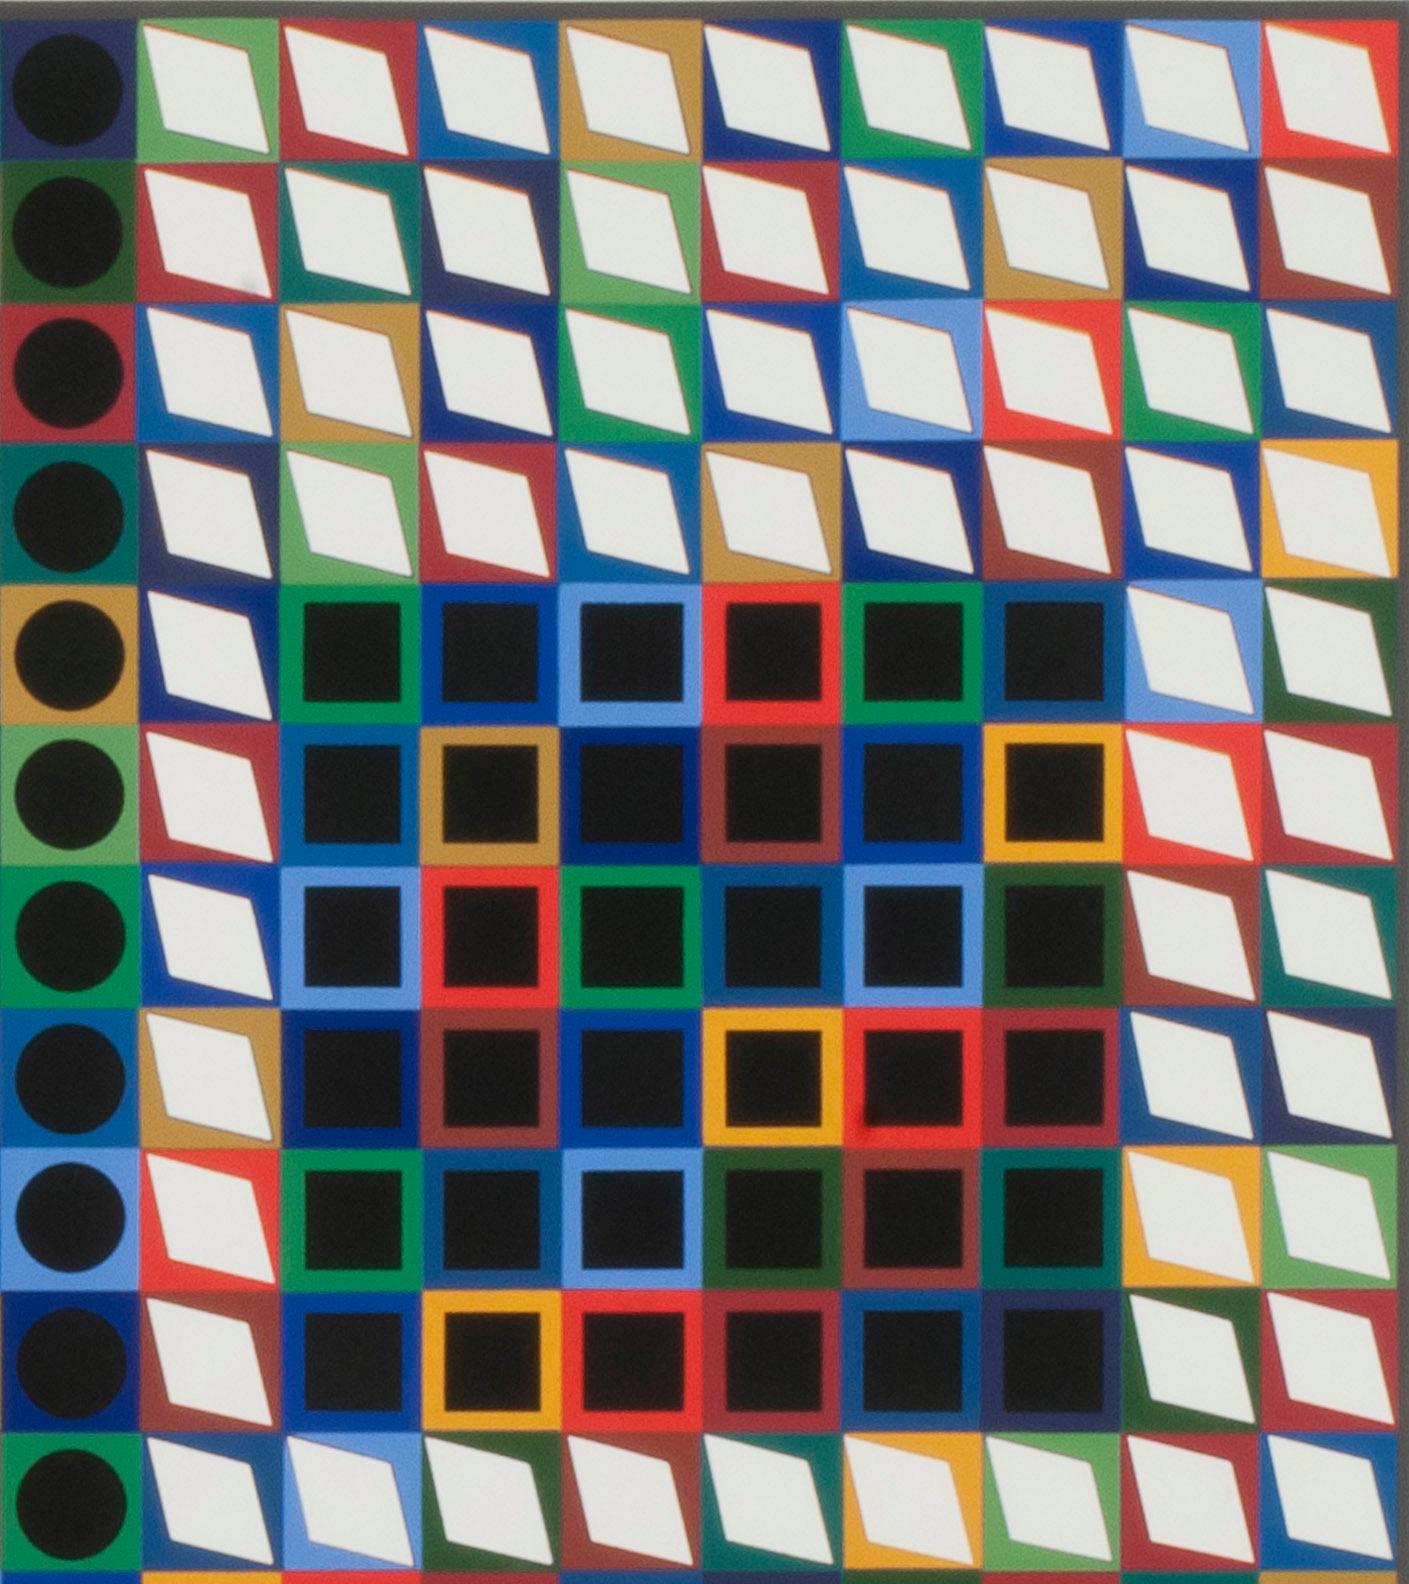 Our M.C.-2 - Op Art Print by Victor Vasarely